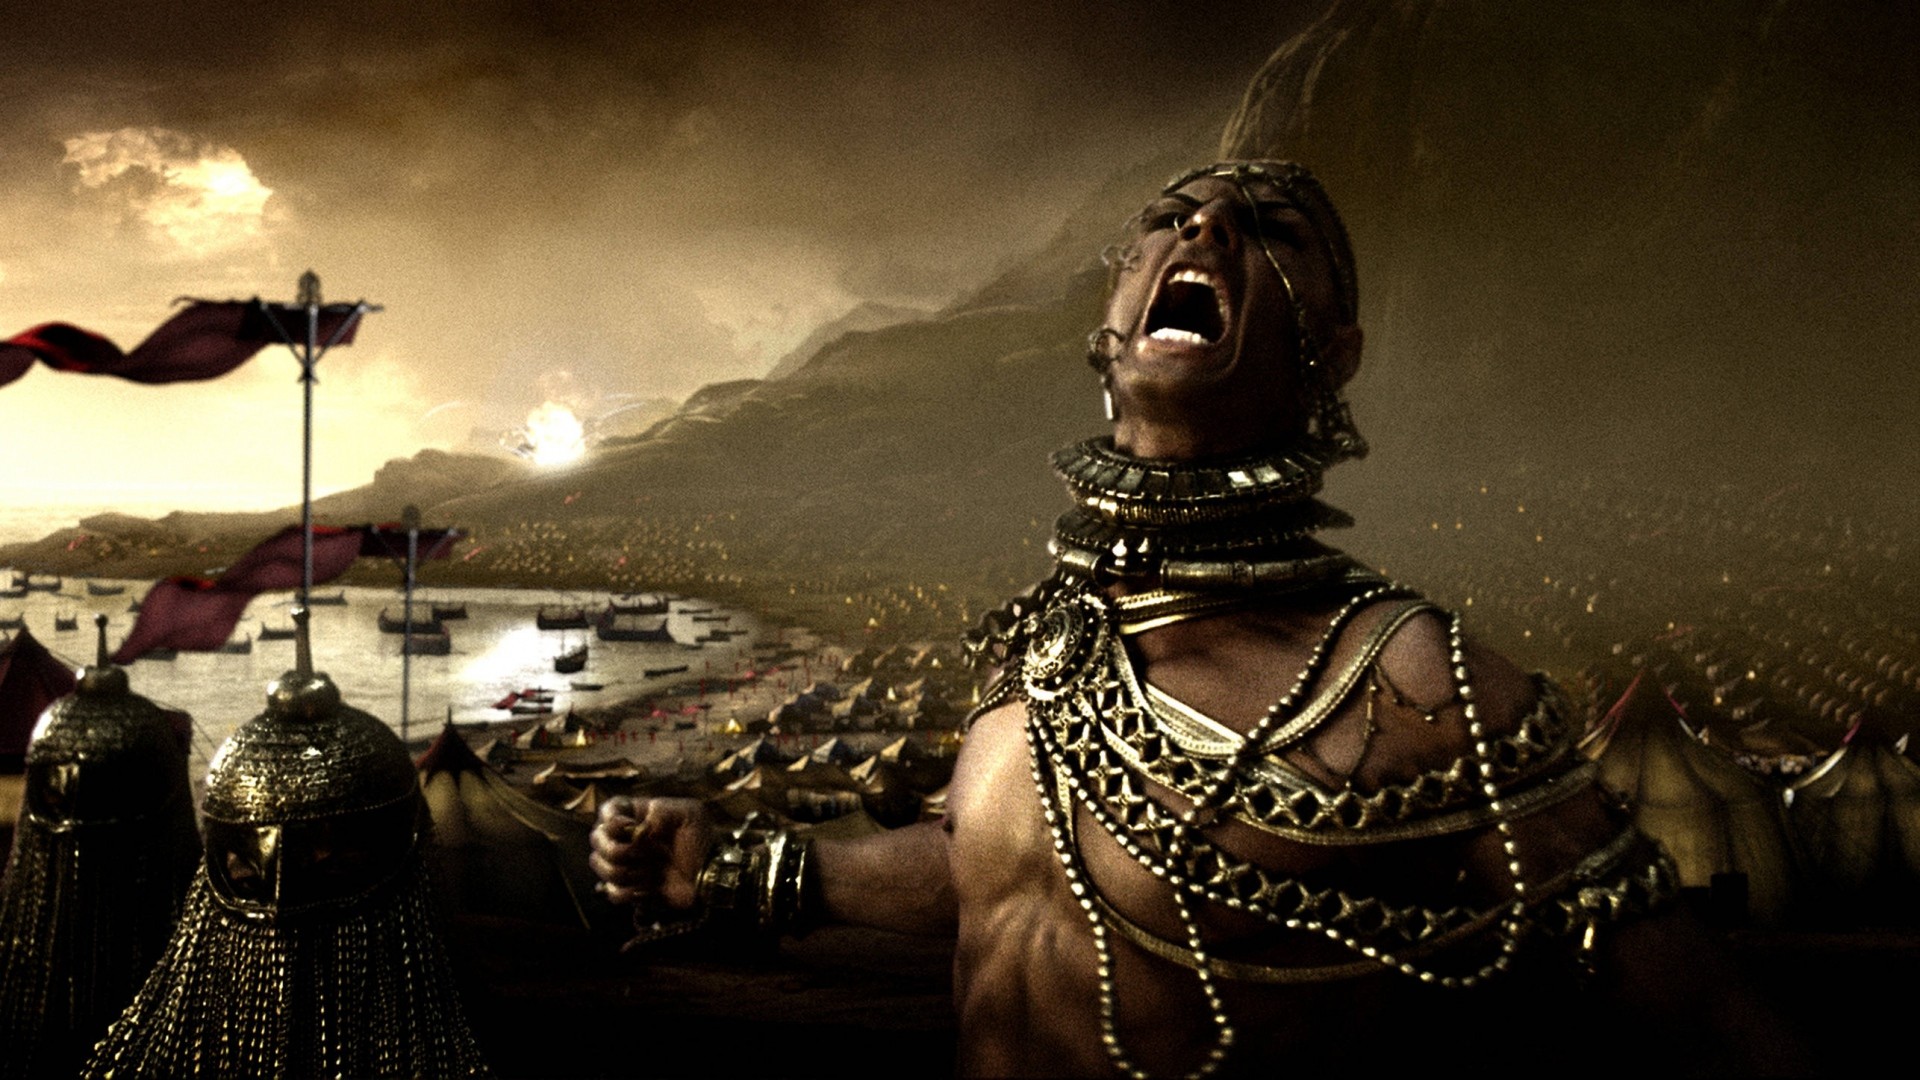 1920x1080 Download now full hd wallpaper 300 spartans xerxes rage army thermopylae ...